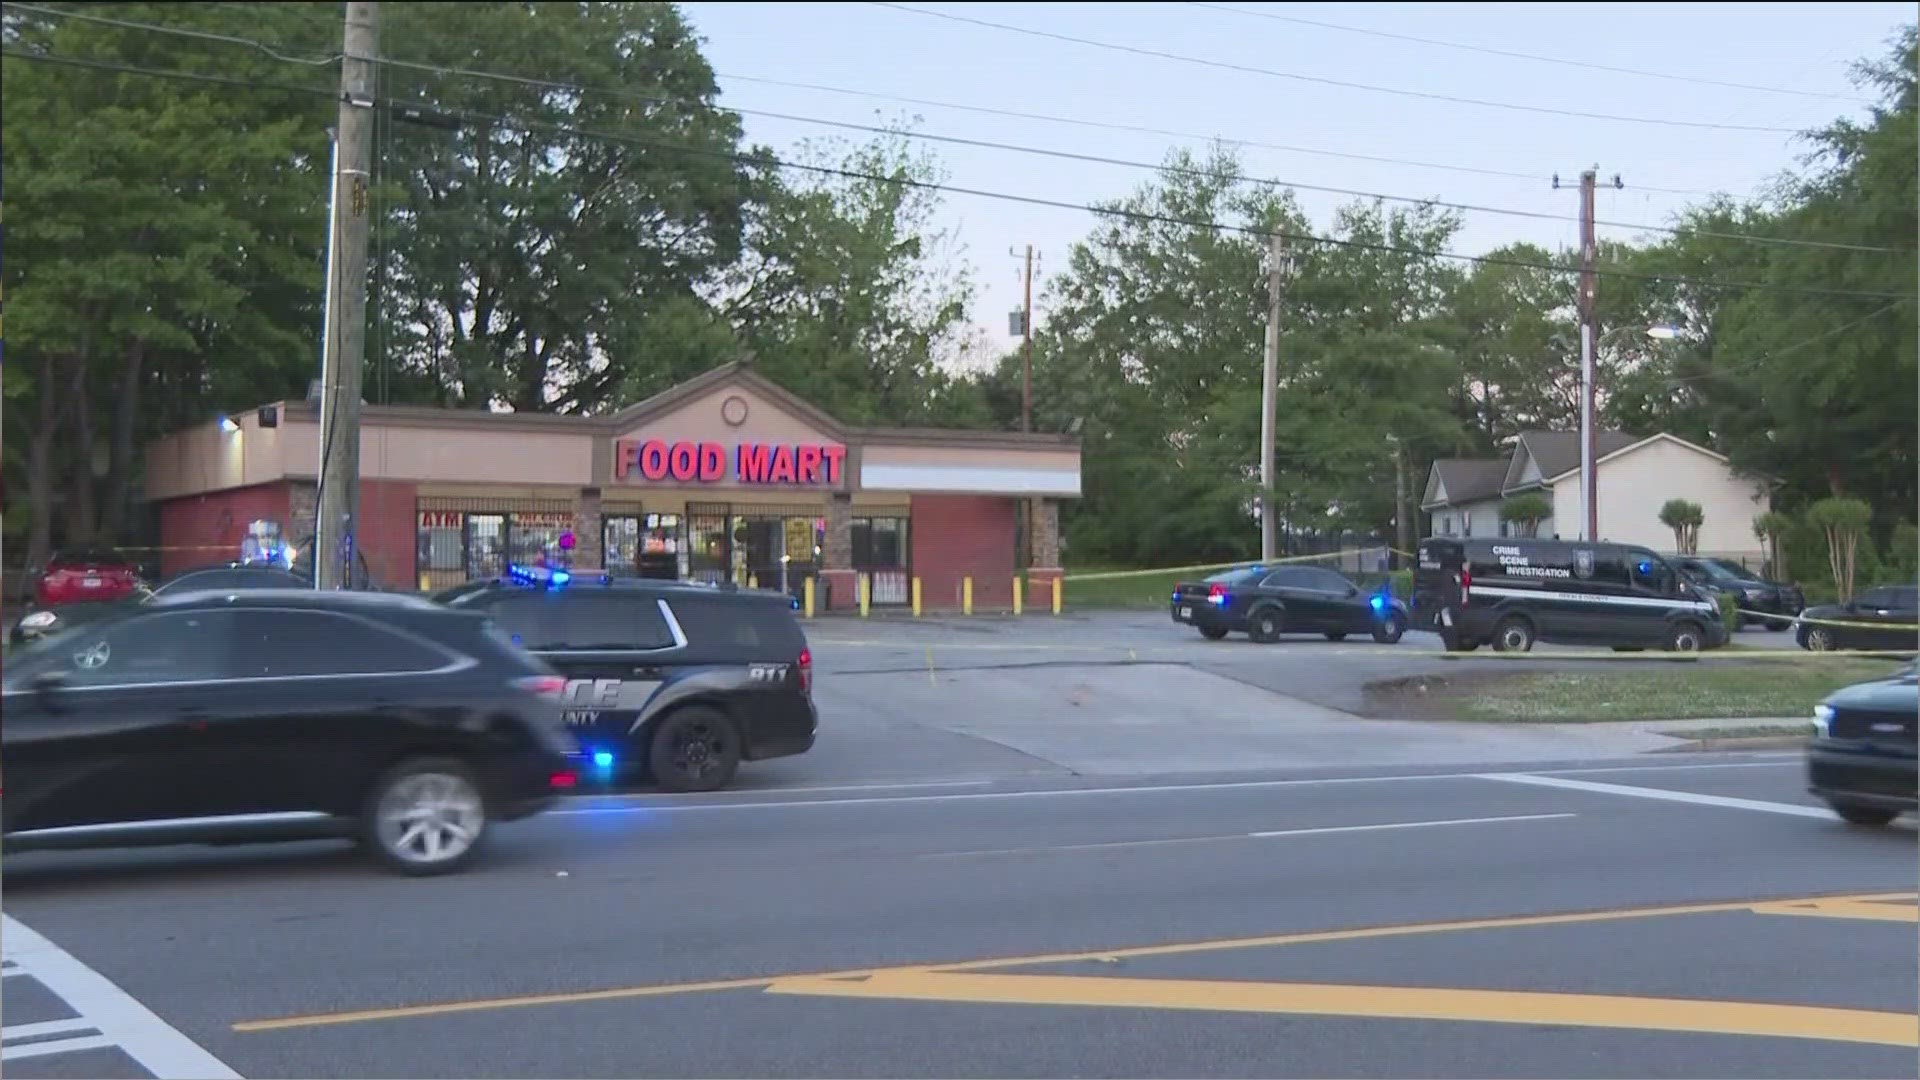 DeKalb County Police are investigating a shooting at a Food Mart that left one man dead on Sunday evening.